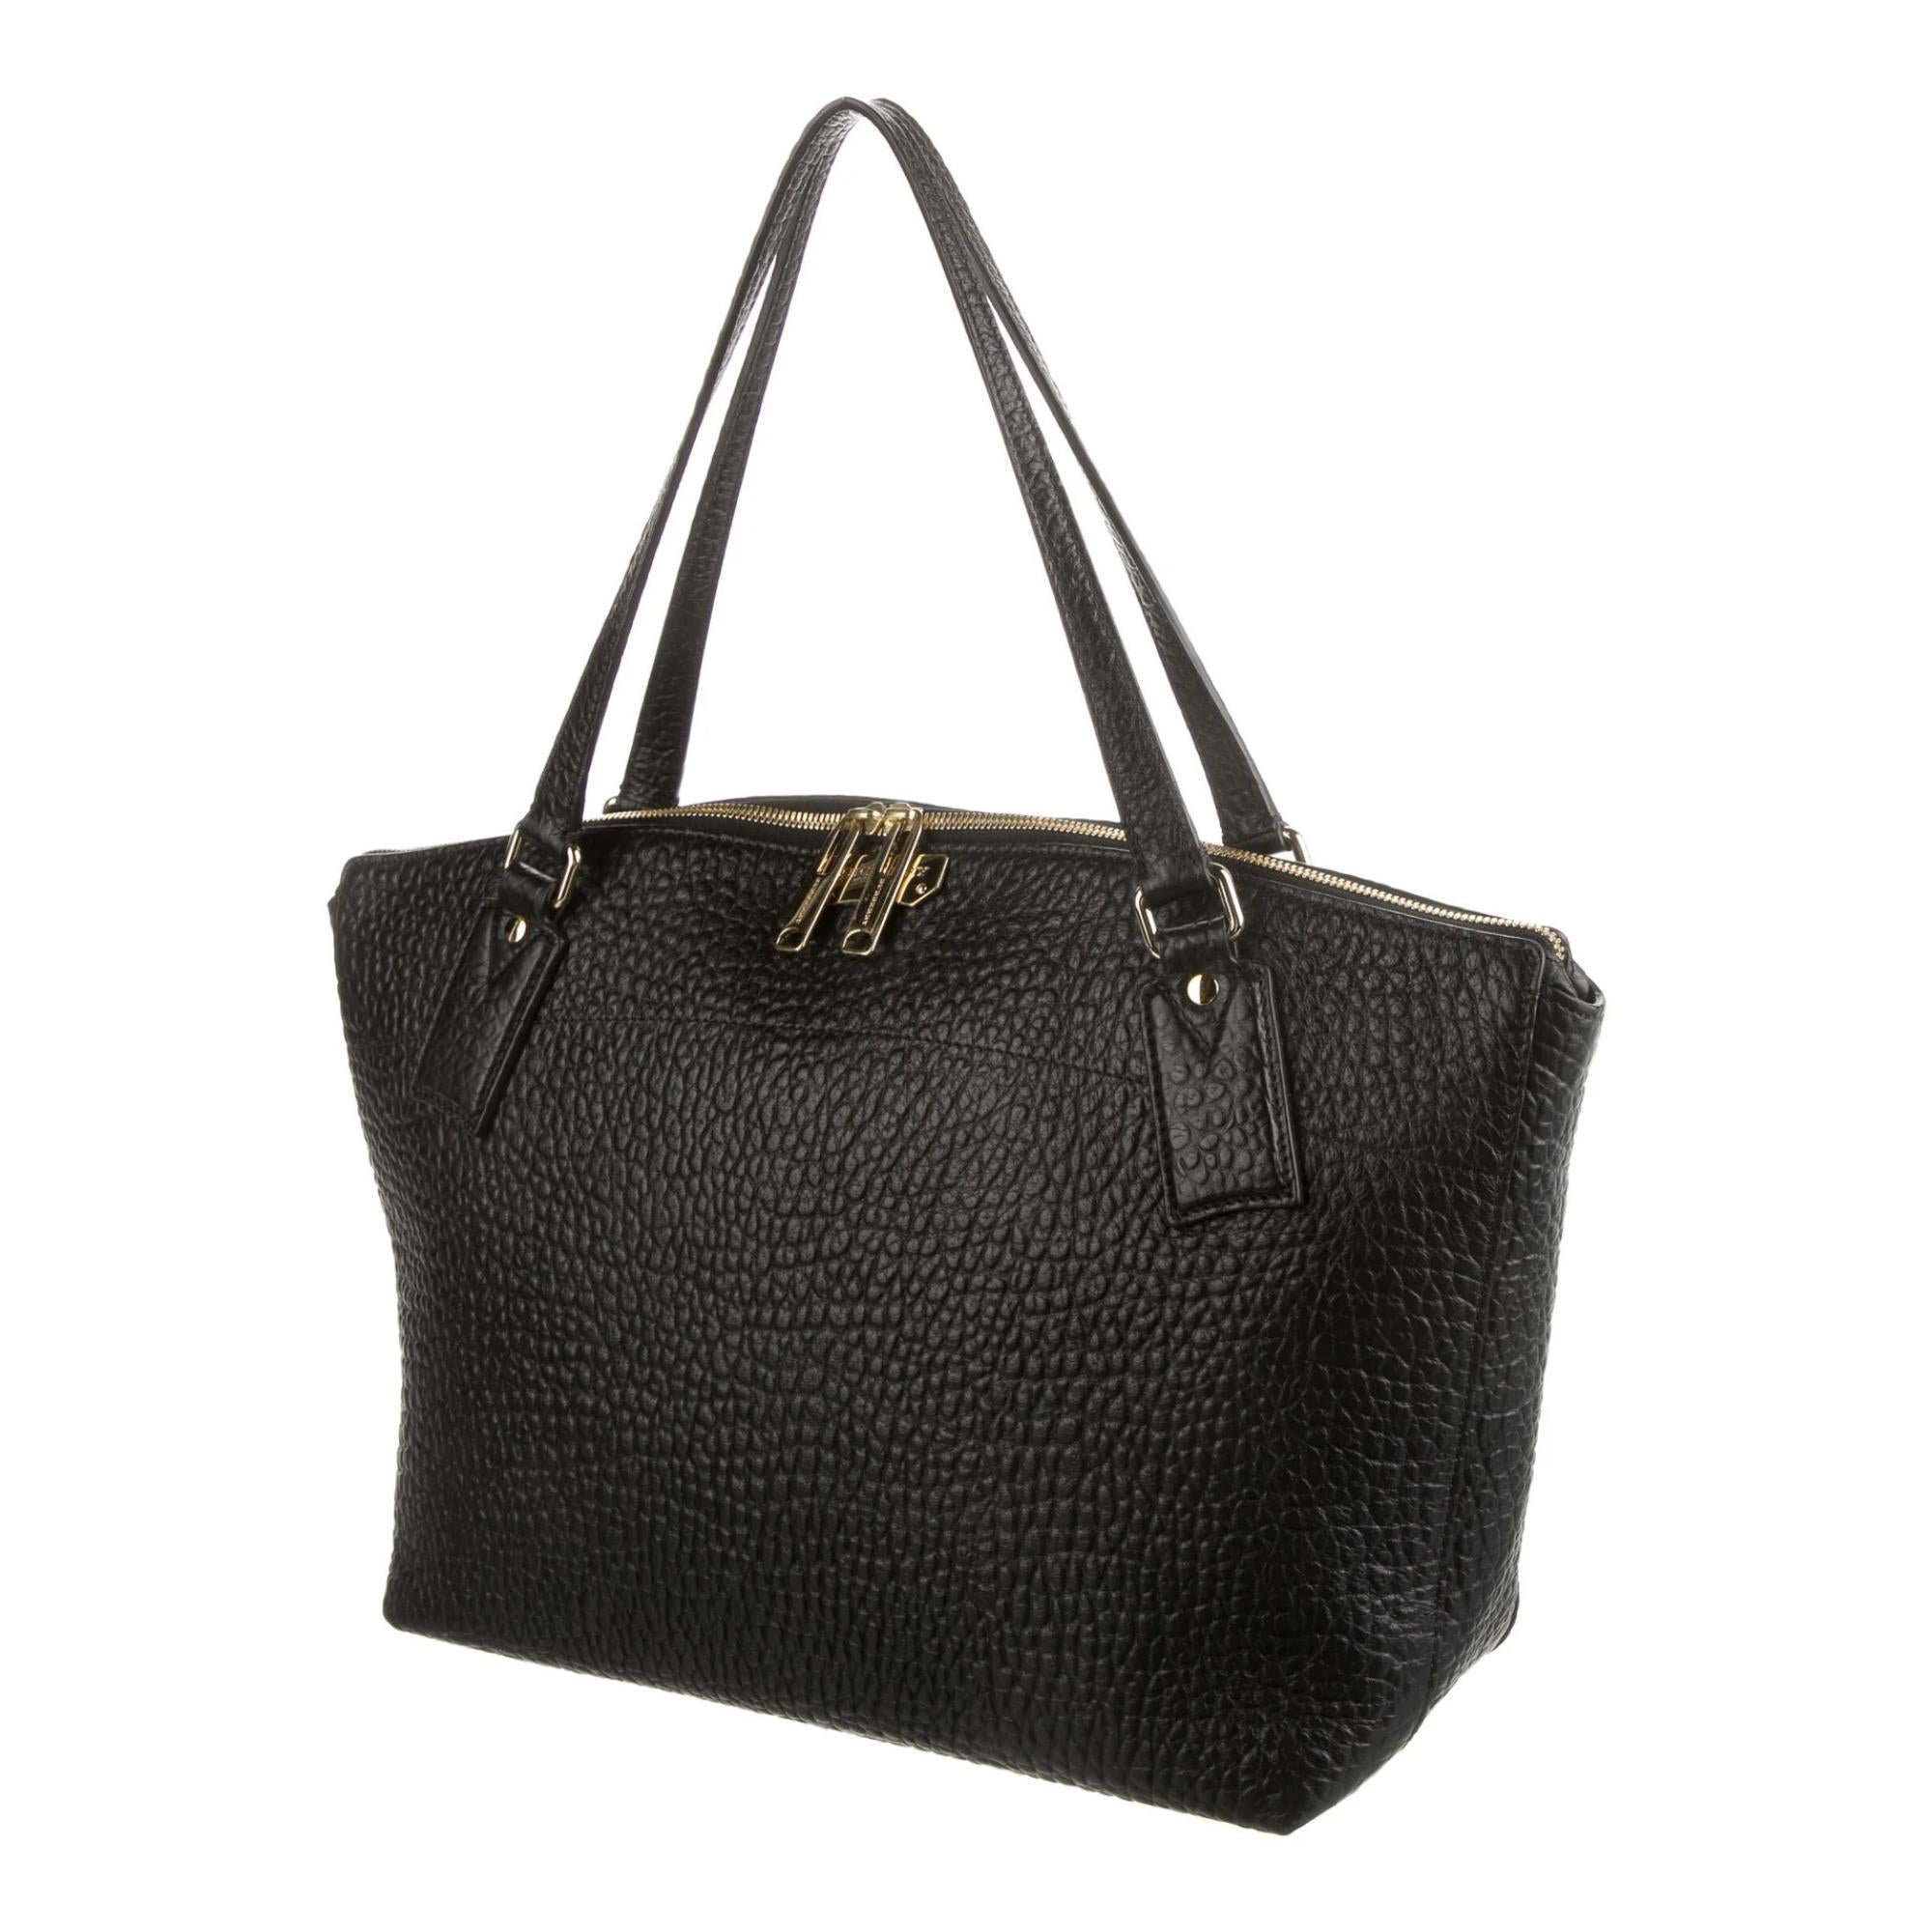 Introducing this Burberry tote in strong textured black leather. The bag features pebbled leather construction, gold-tone hardware, dual flat leather handles, top zip closure and protective feet at the base. The bag is finished with logo jacquard